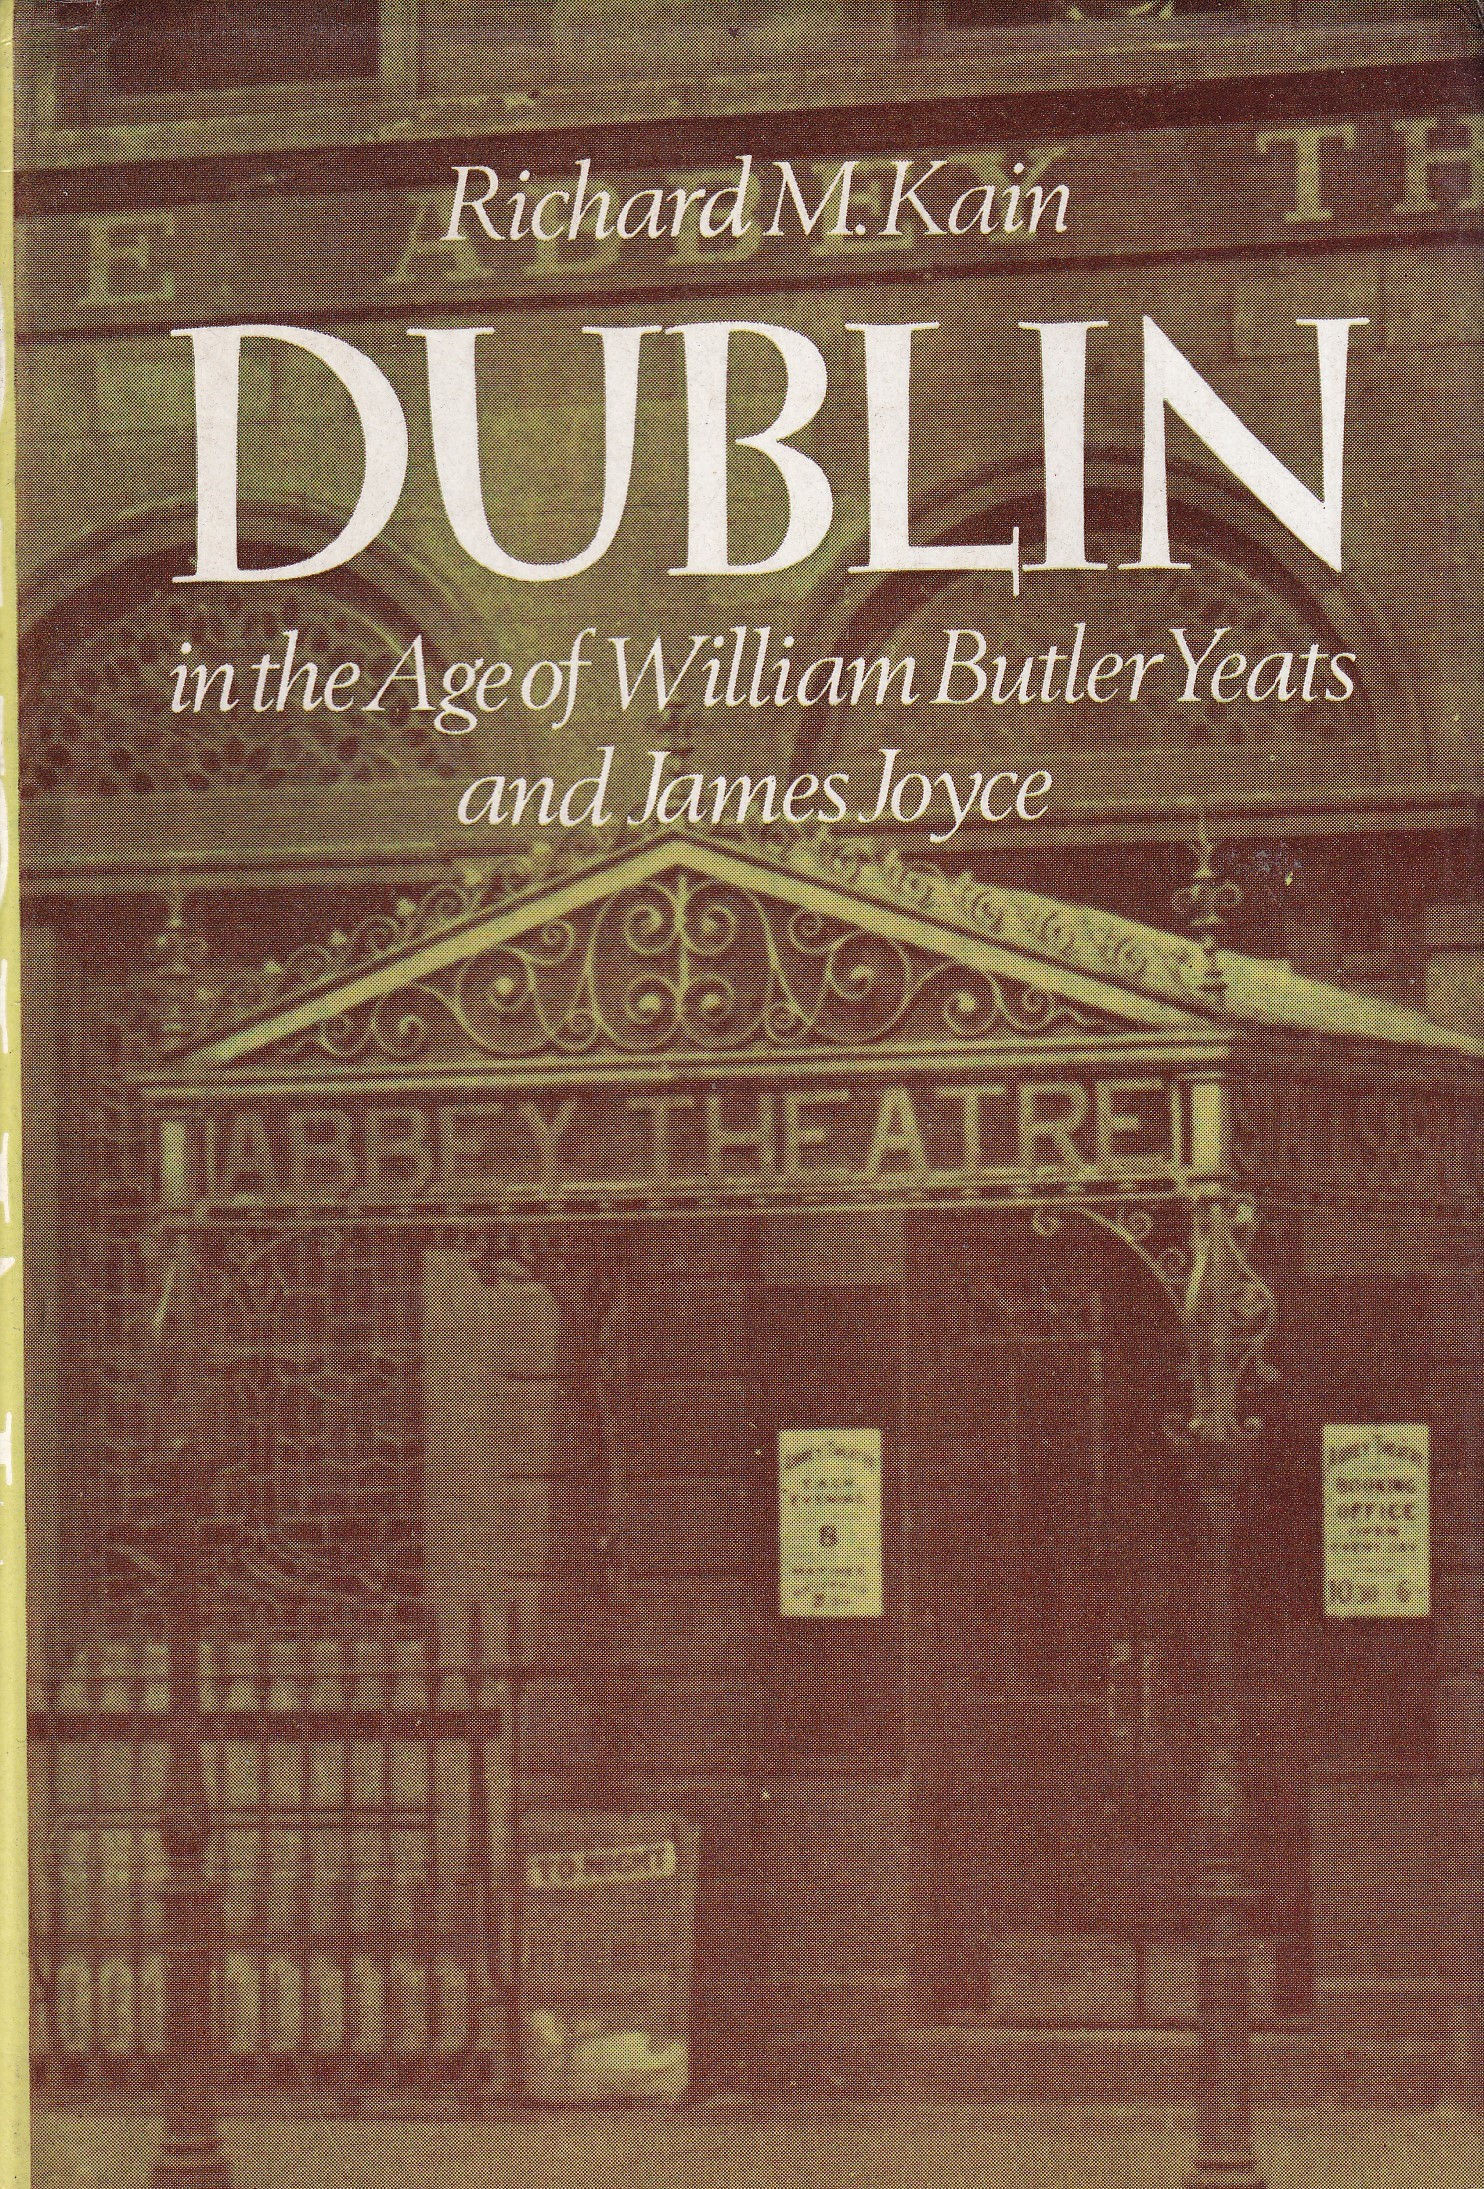 Dublin in the Age of William Butler Yeats and James Joyce | Richard M. Kain | Charlie Byrne's